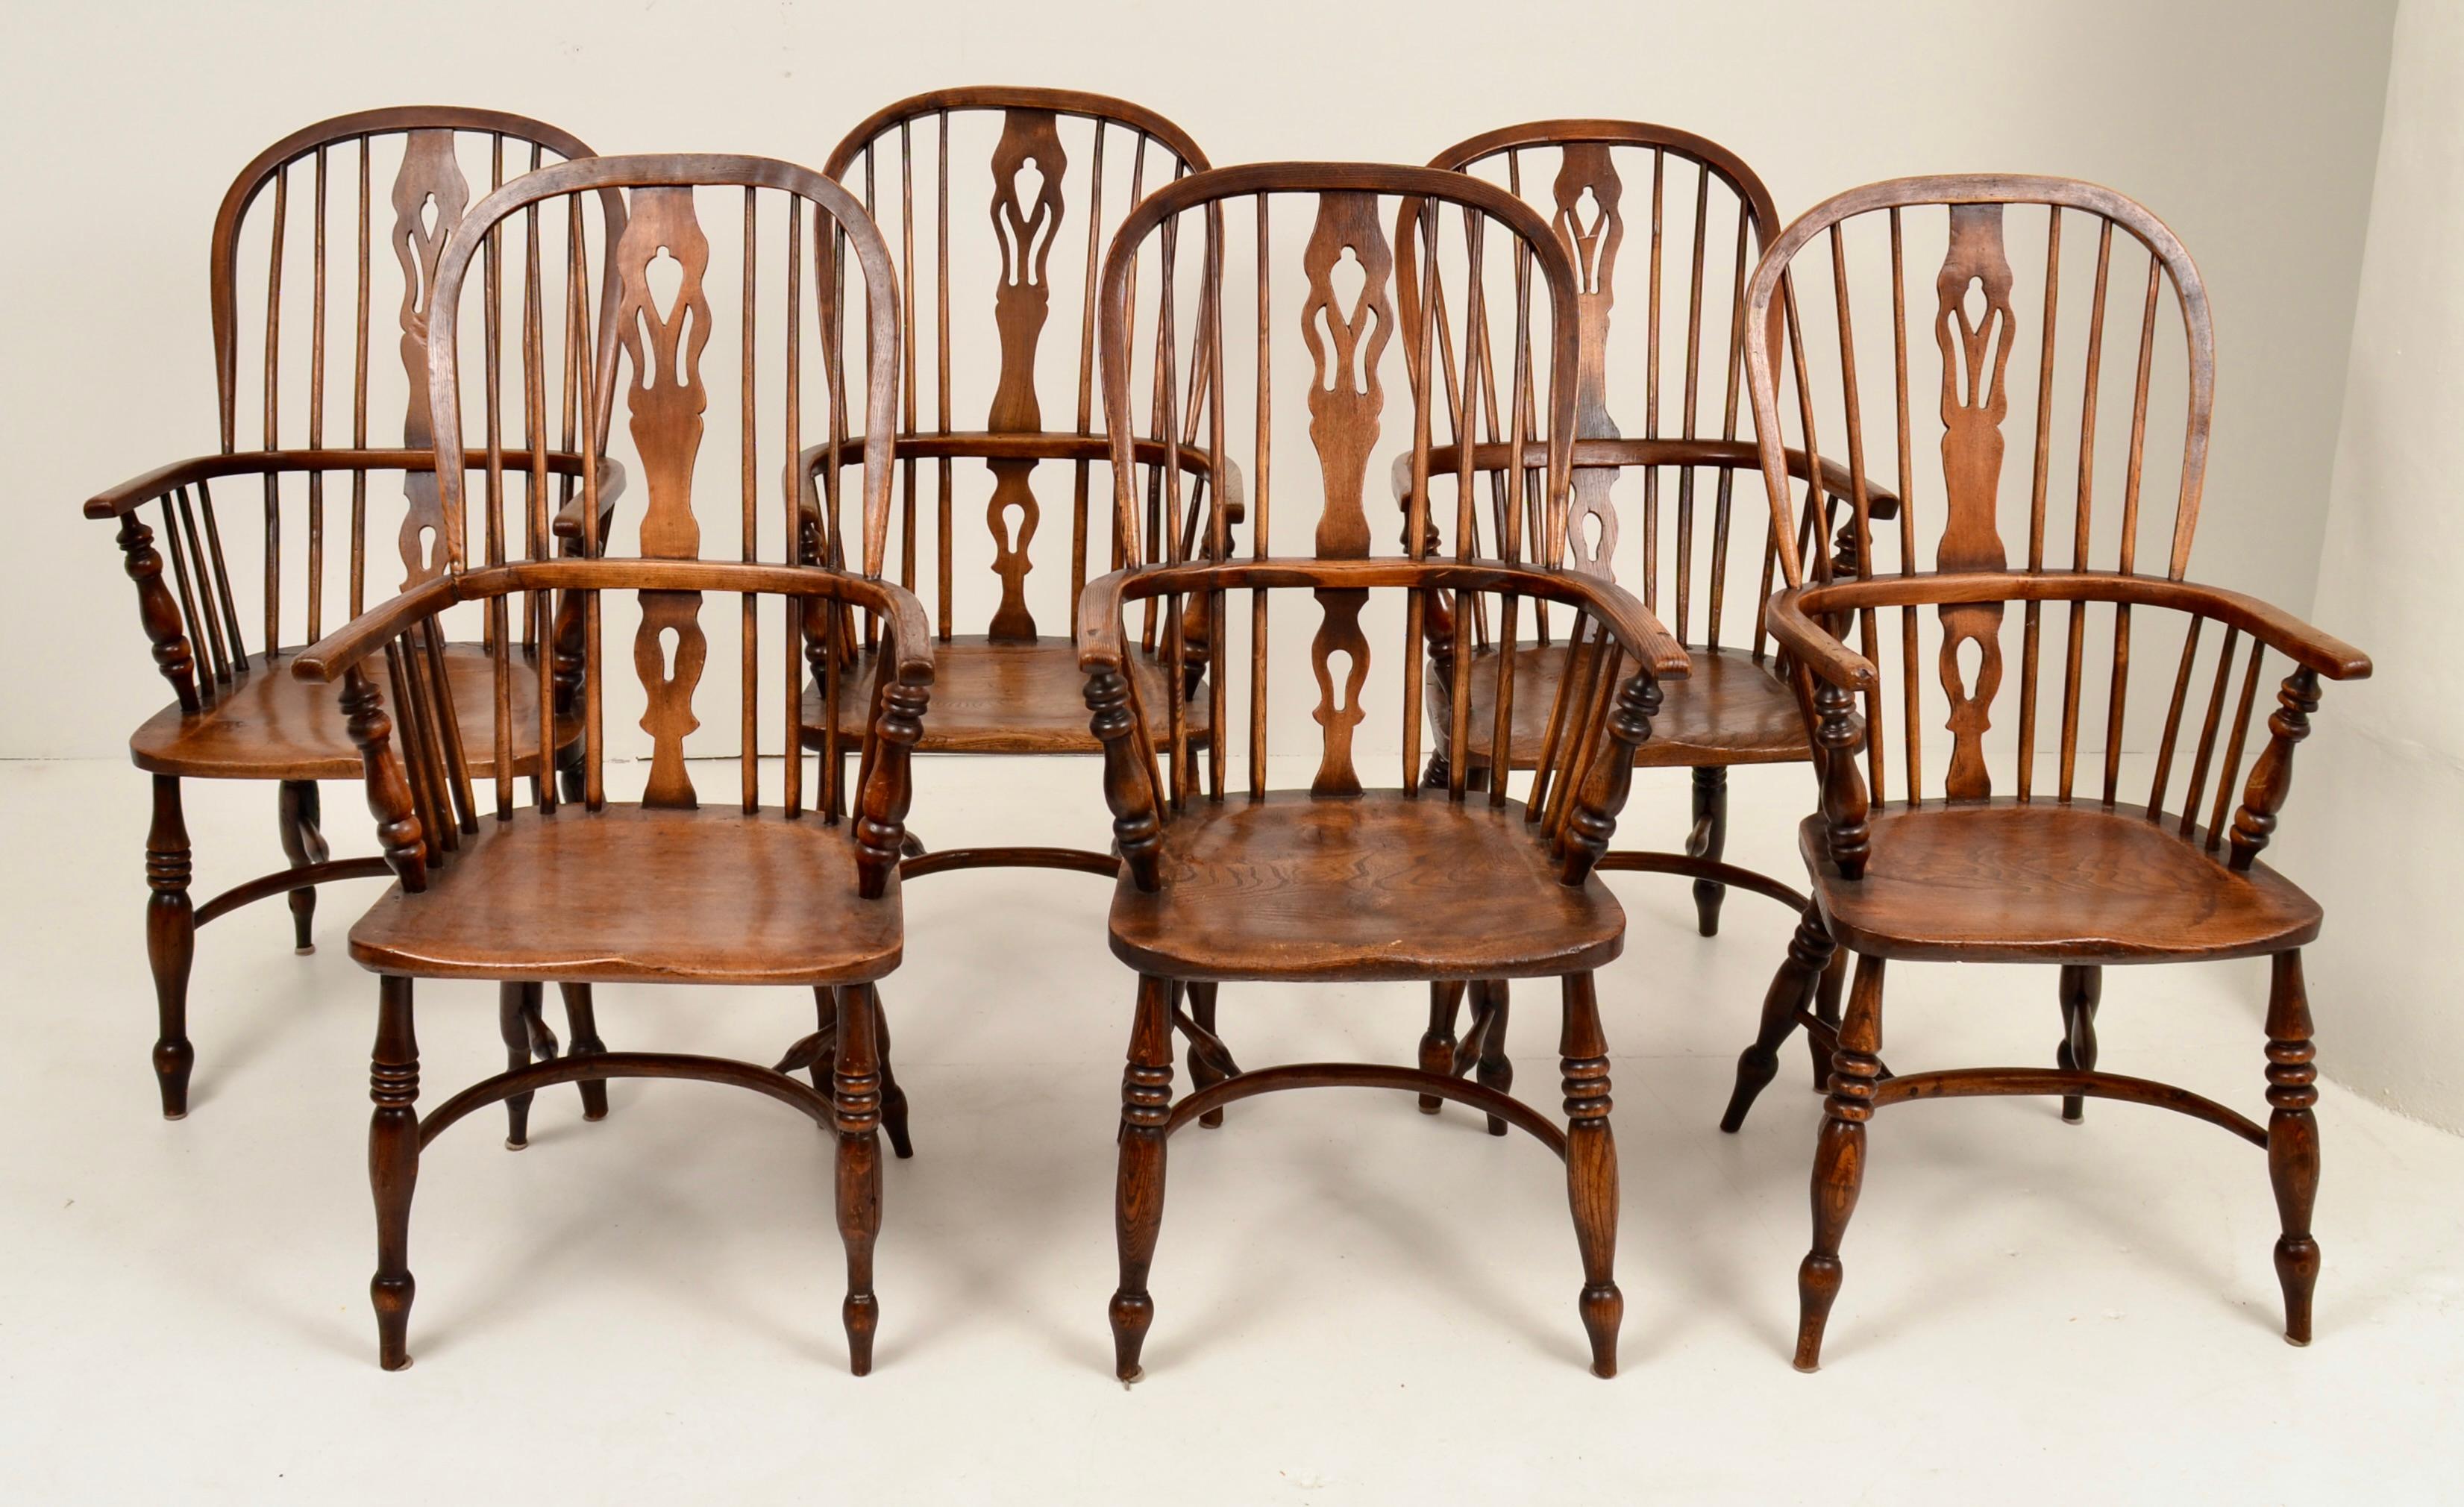 19th C English Oak Windsor Chairs - Set of Six For Sale 2